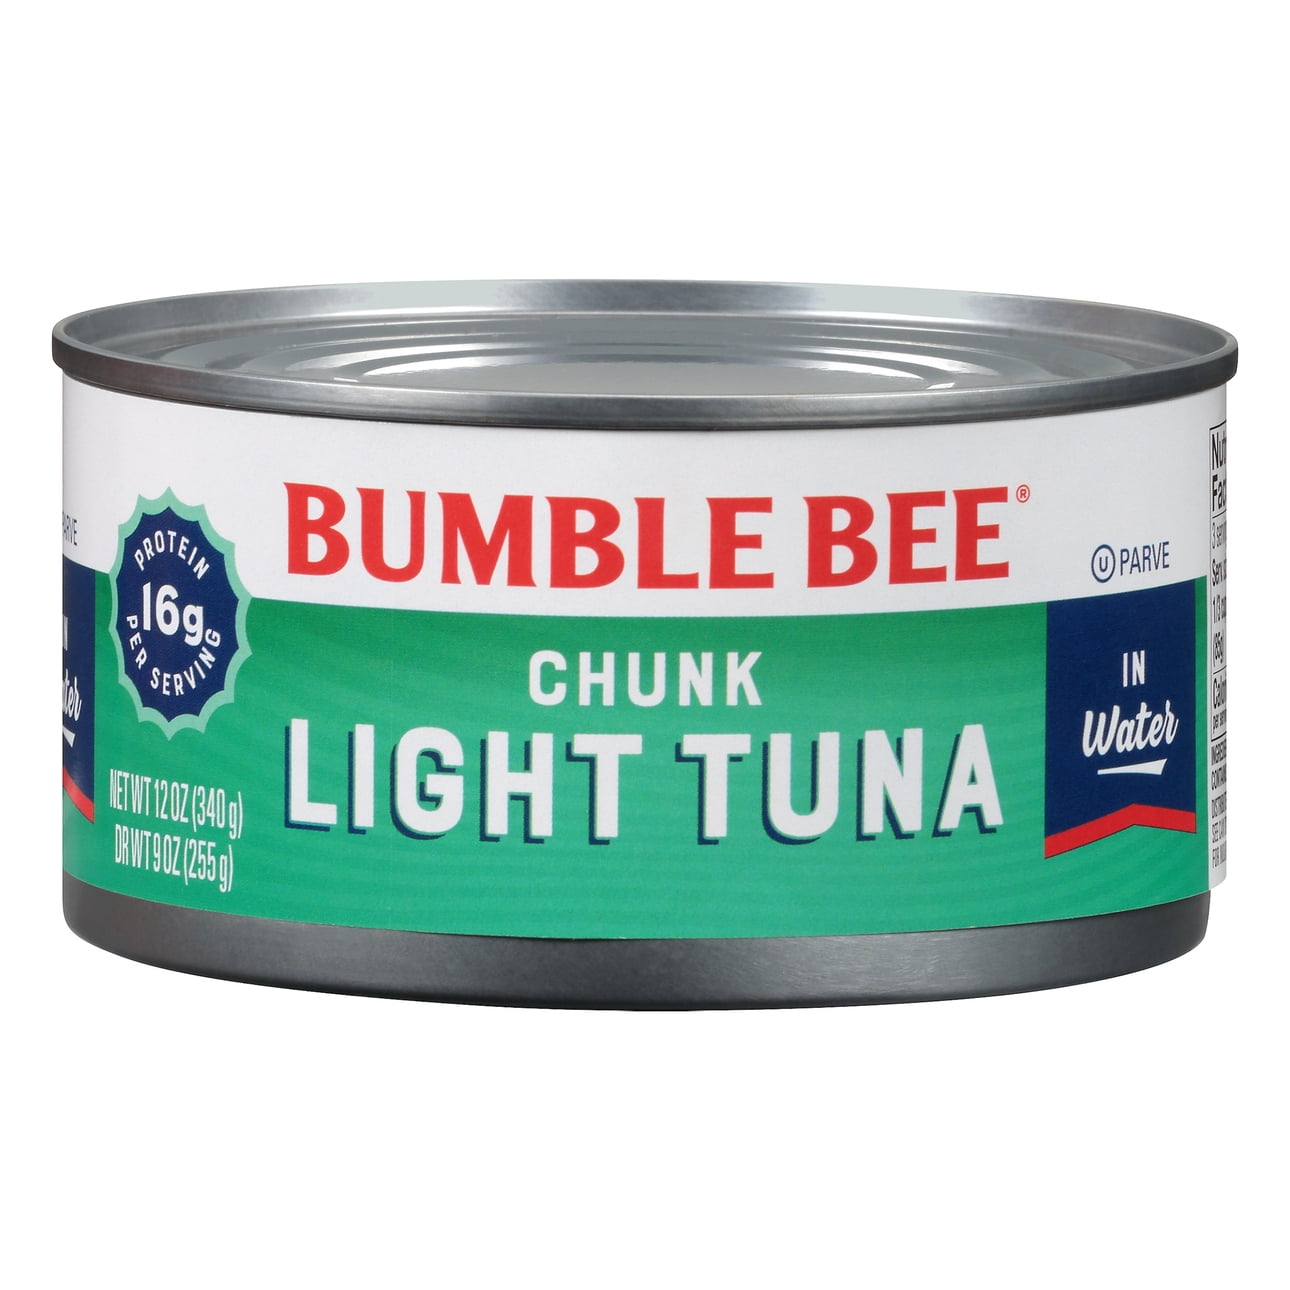 Spis aftensmad uvidenhed Morse kode Bumble Bee Chunk Light Tuna in Water, 12 oz can - Walmart.com